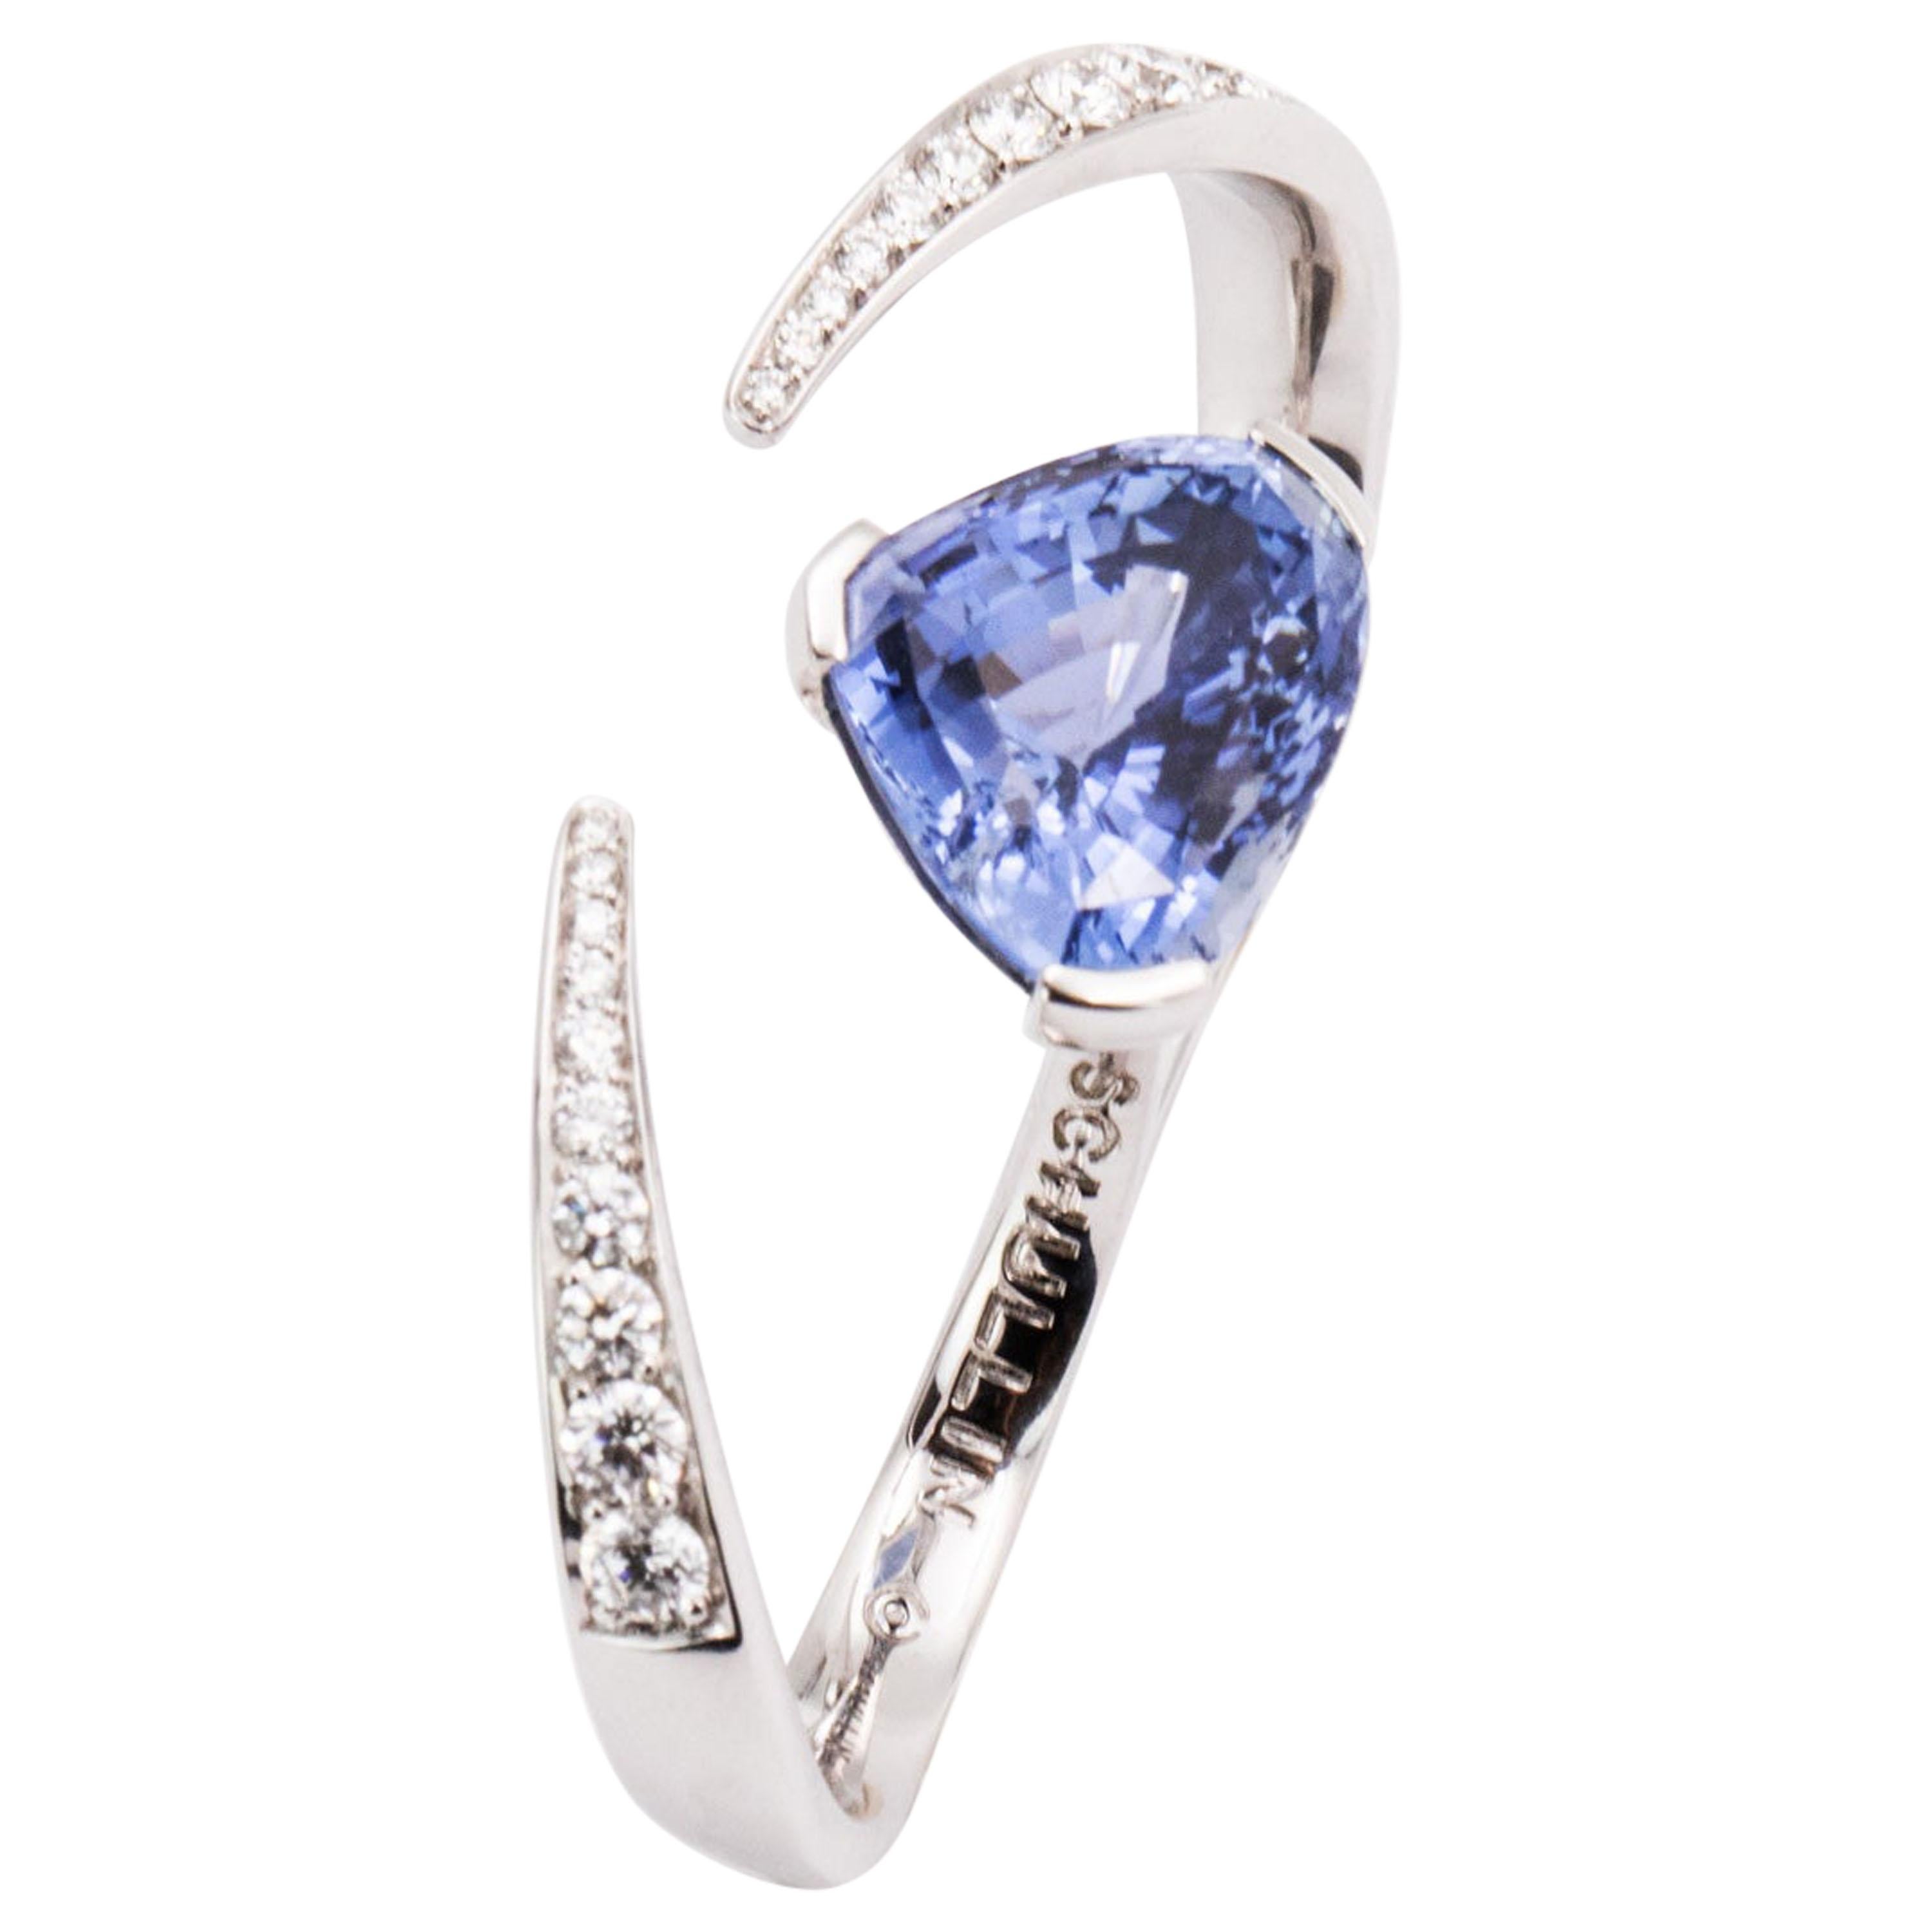 8.97 Carat Pear-Shaped Blue Sapphire and Diamond Cocktail Ring For Sale